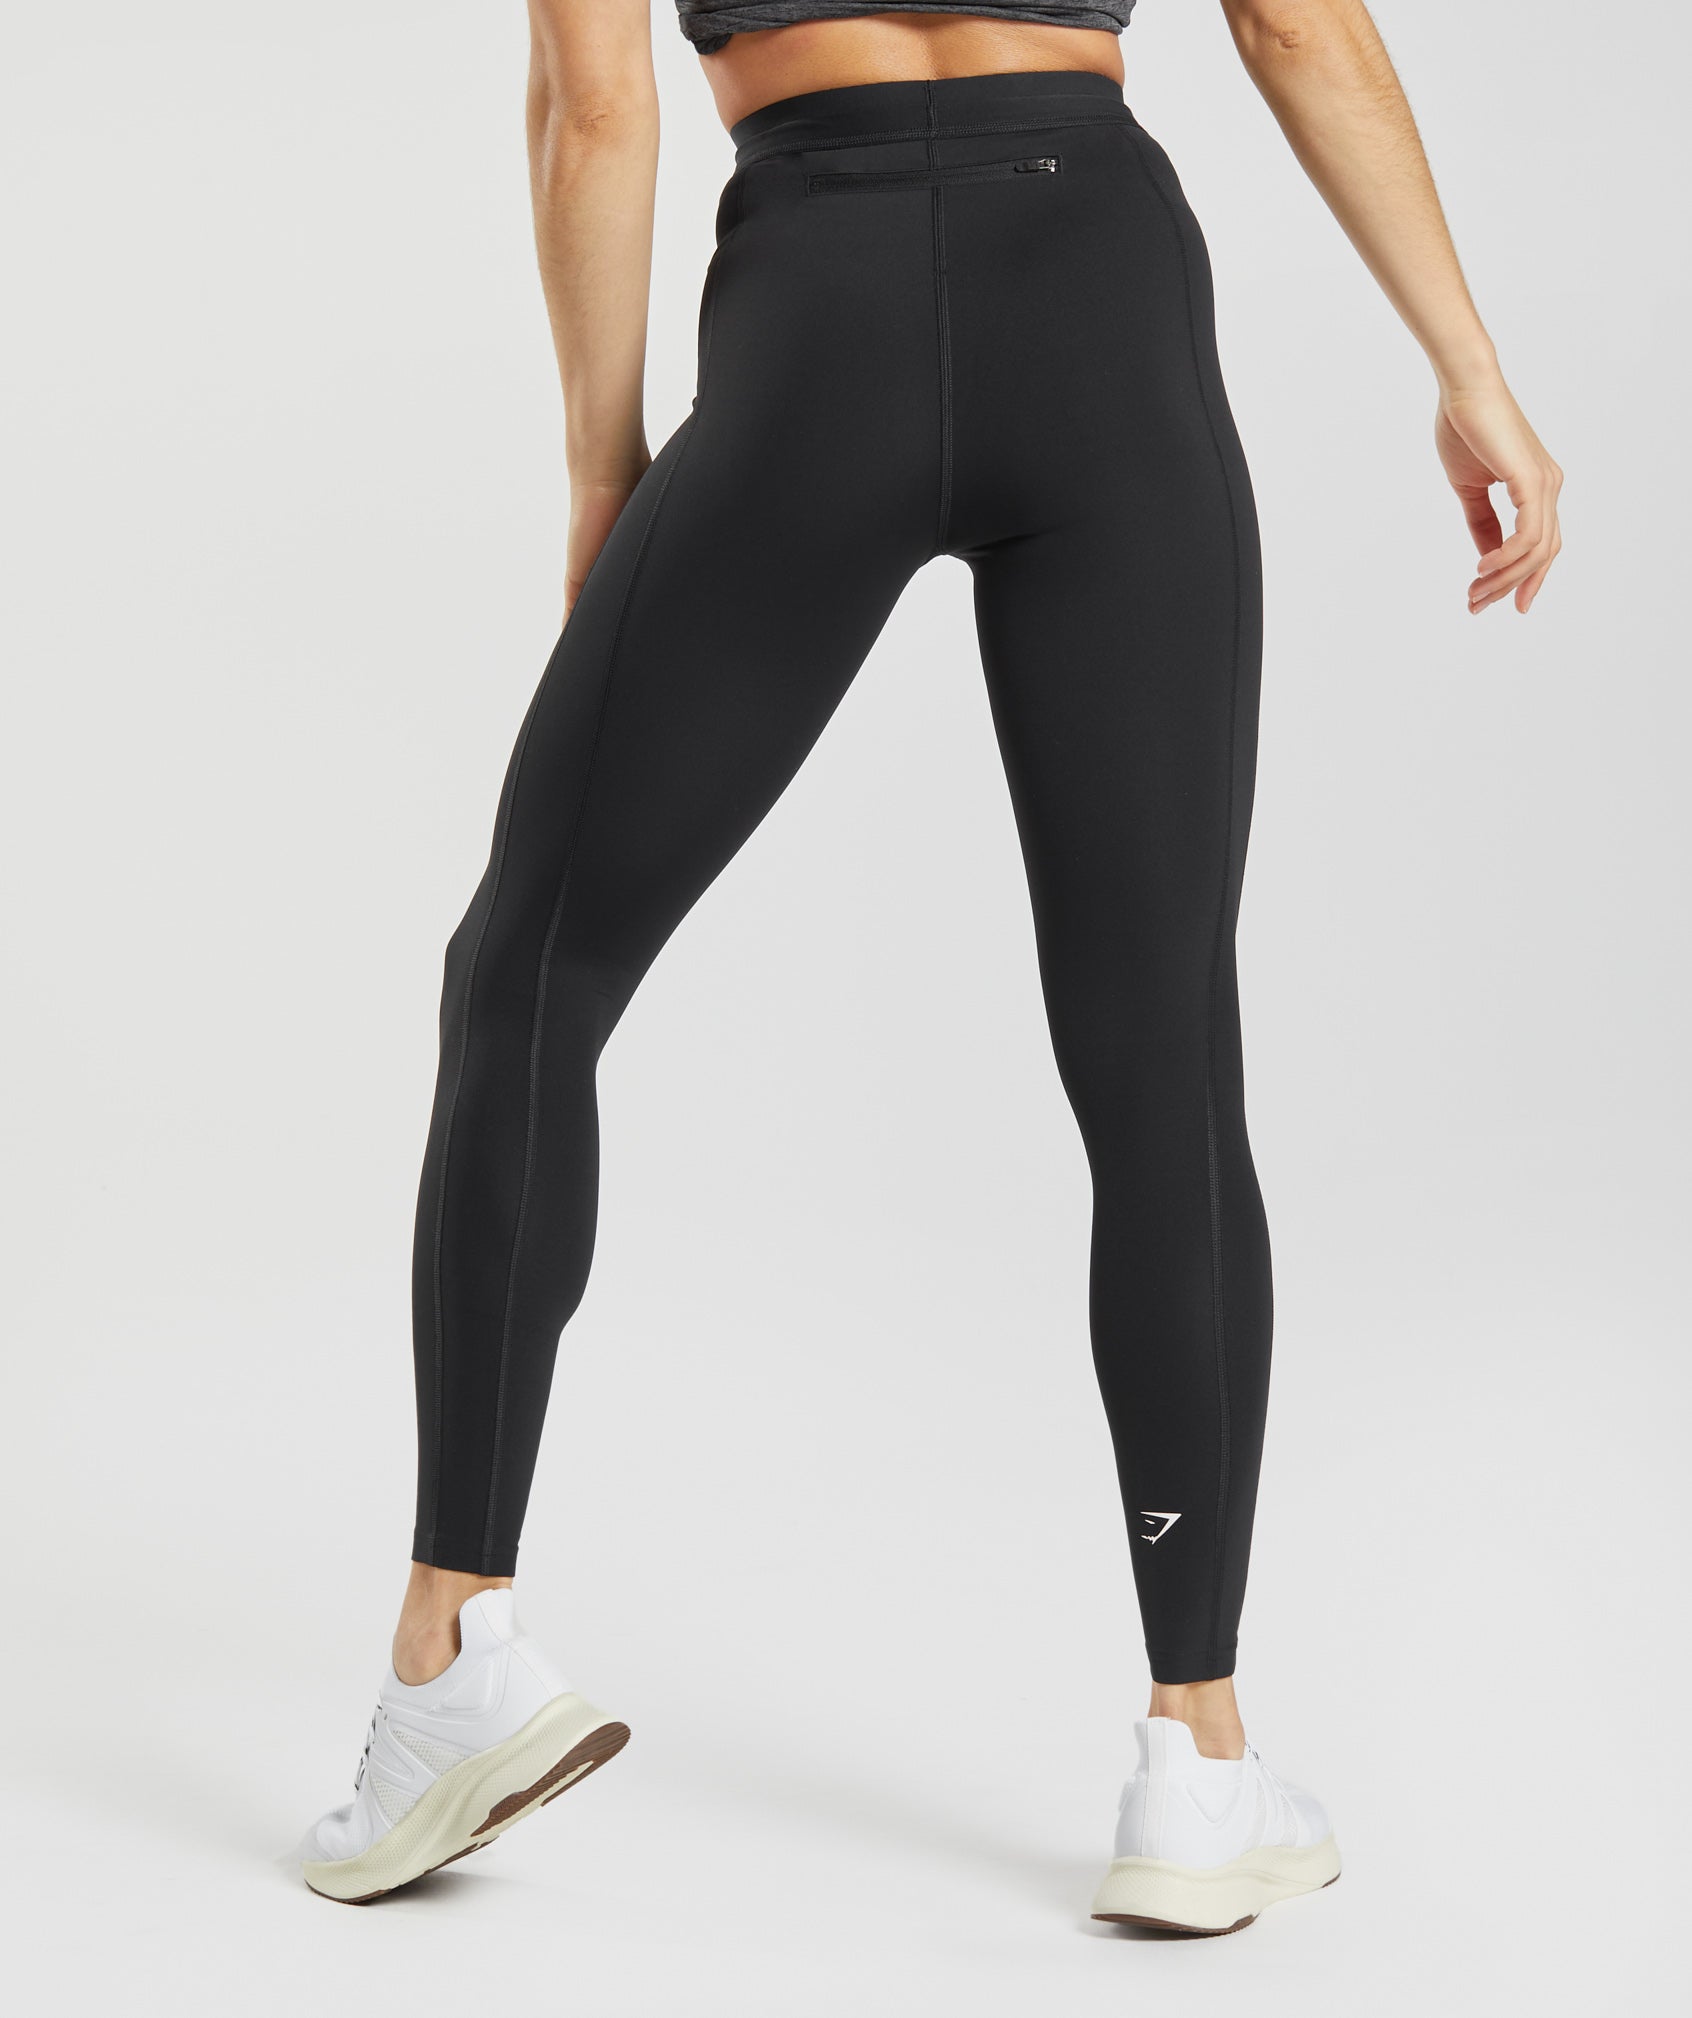 Care running tights - Women - Black, Whale grey, Whale grey